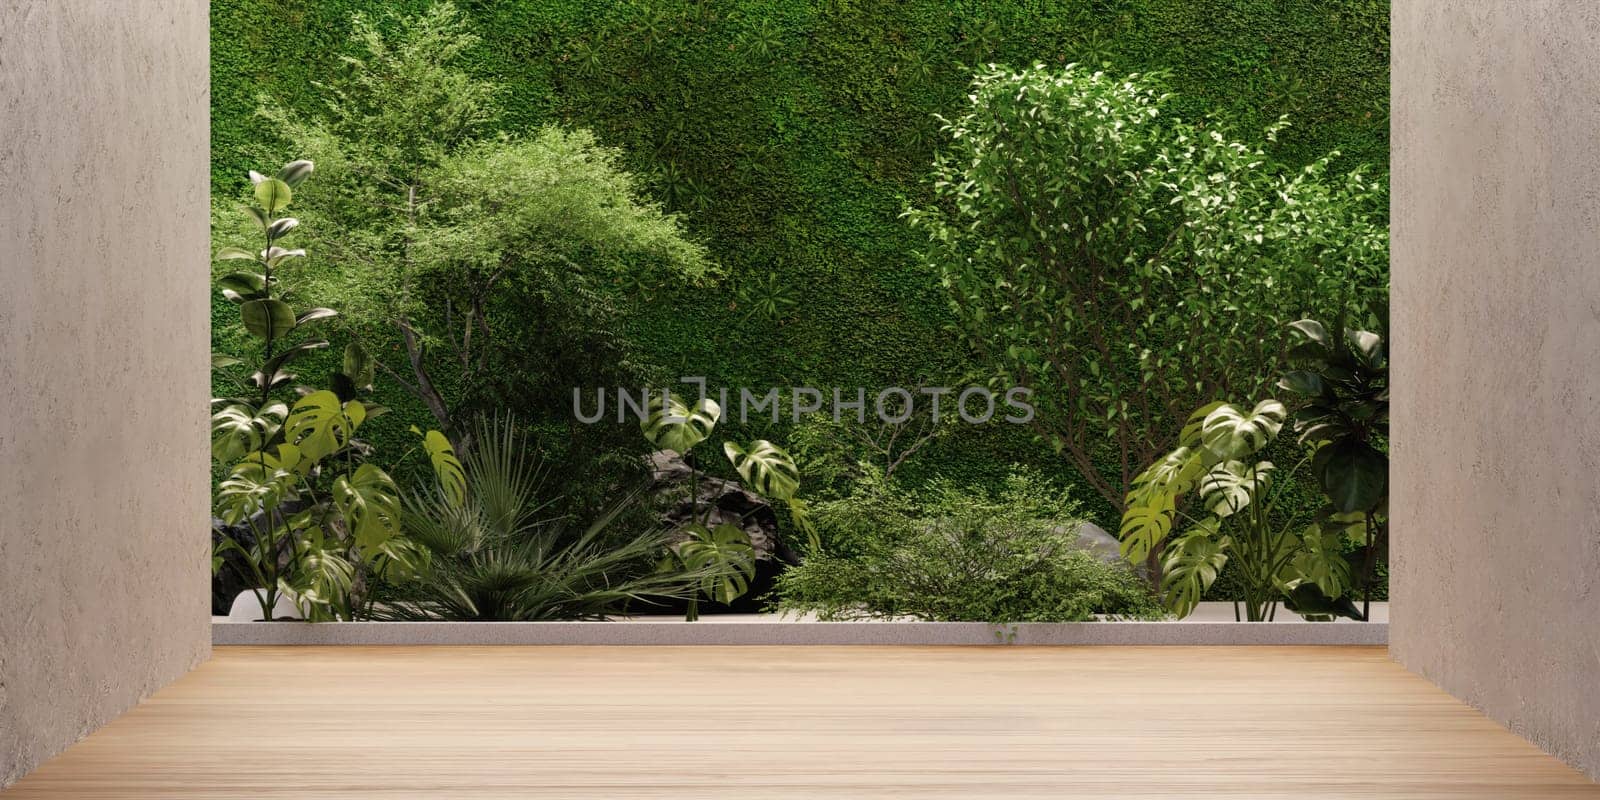 Empty glass room with tropical green plant wall background 3d render, There are wooden floor and concrete wall decorate.